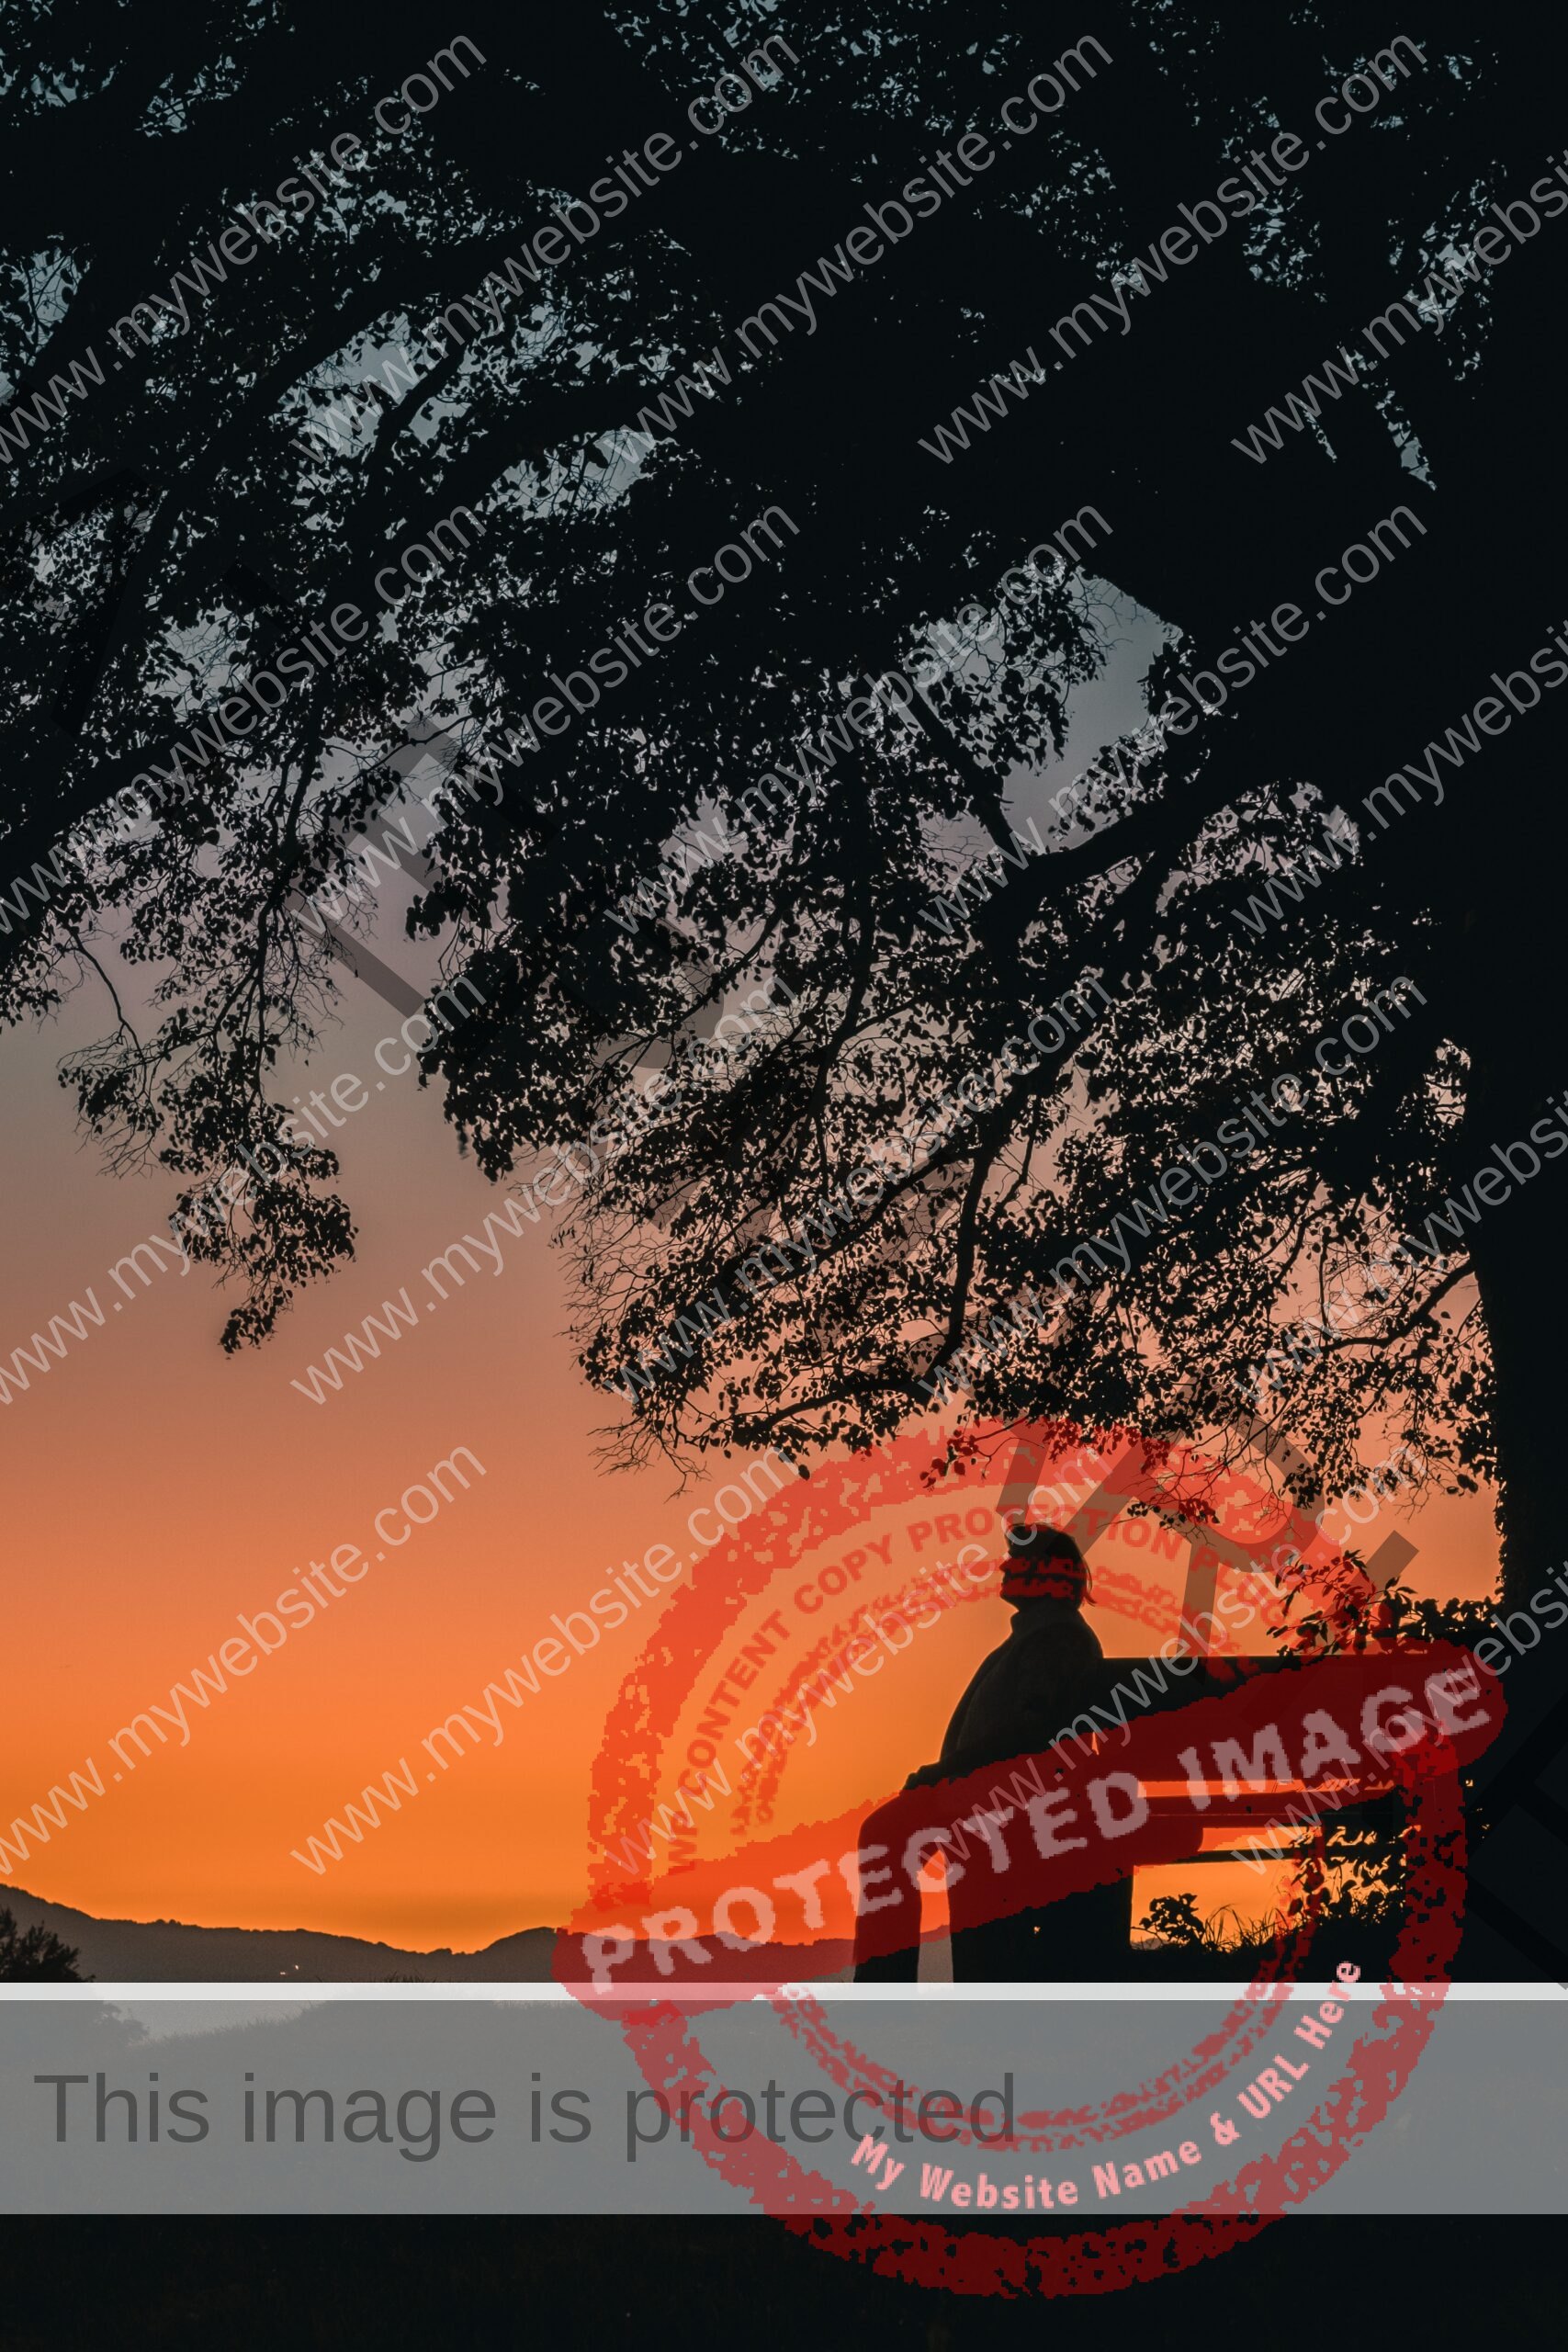 silhouette of a person sitting on a bench under a tree in the mountains with a sunset